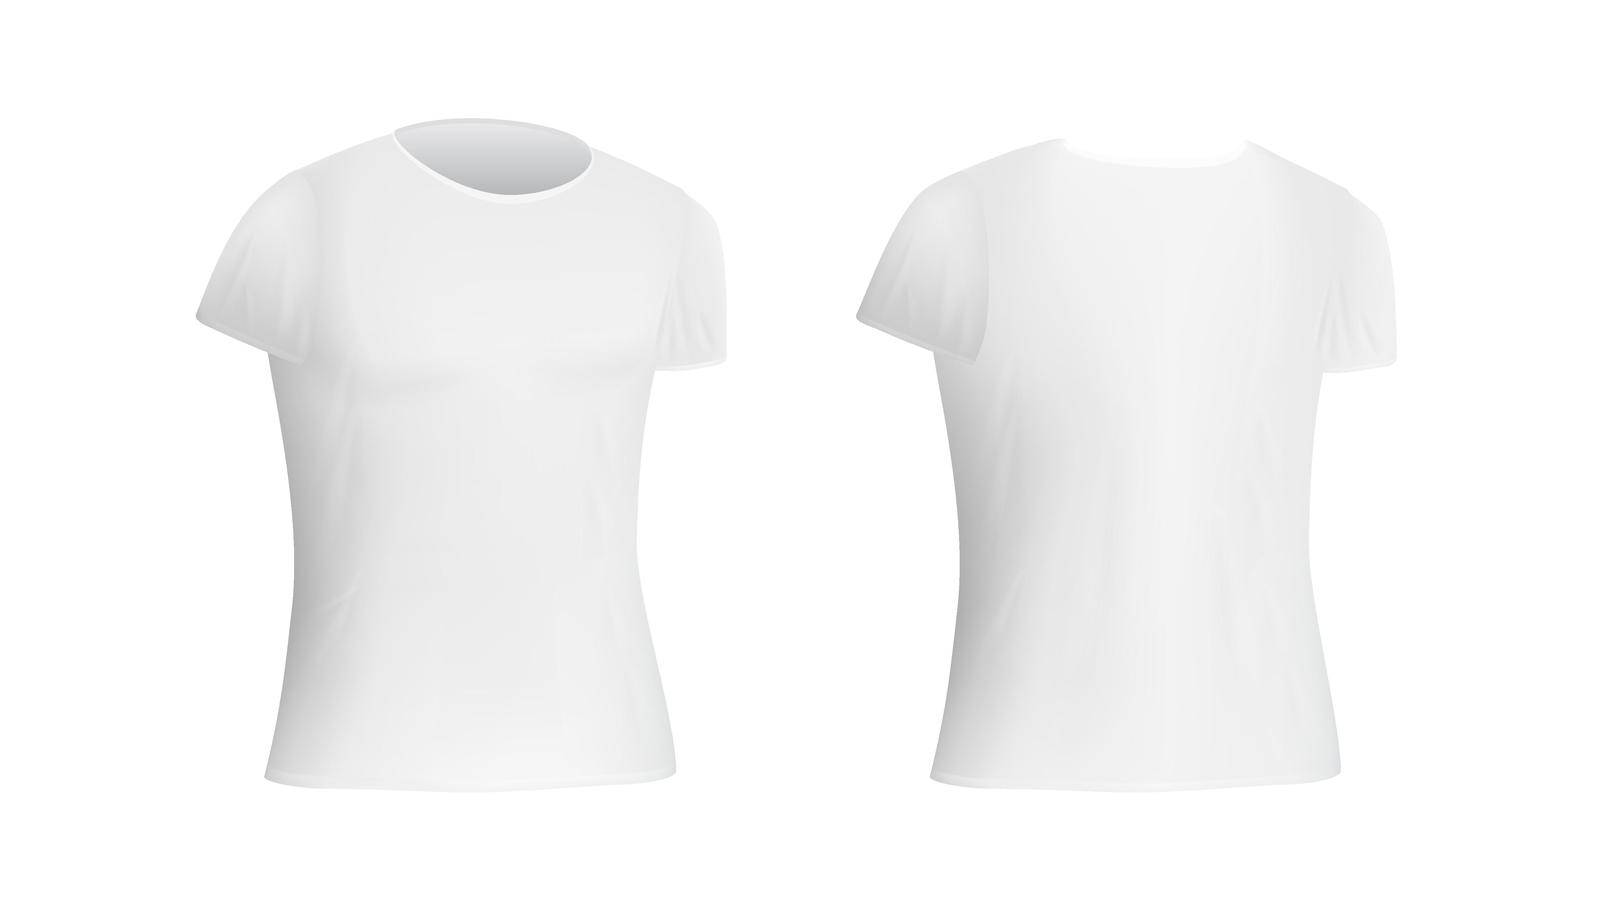 White T-shirt Clothes On White Background by VectorThings